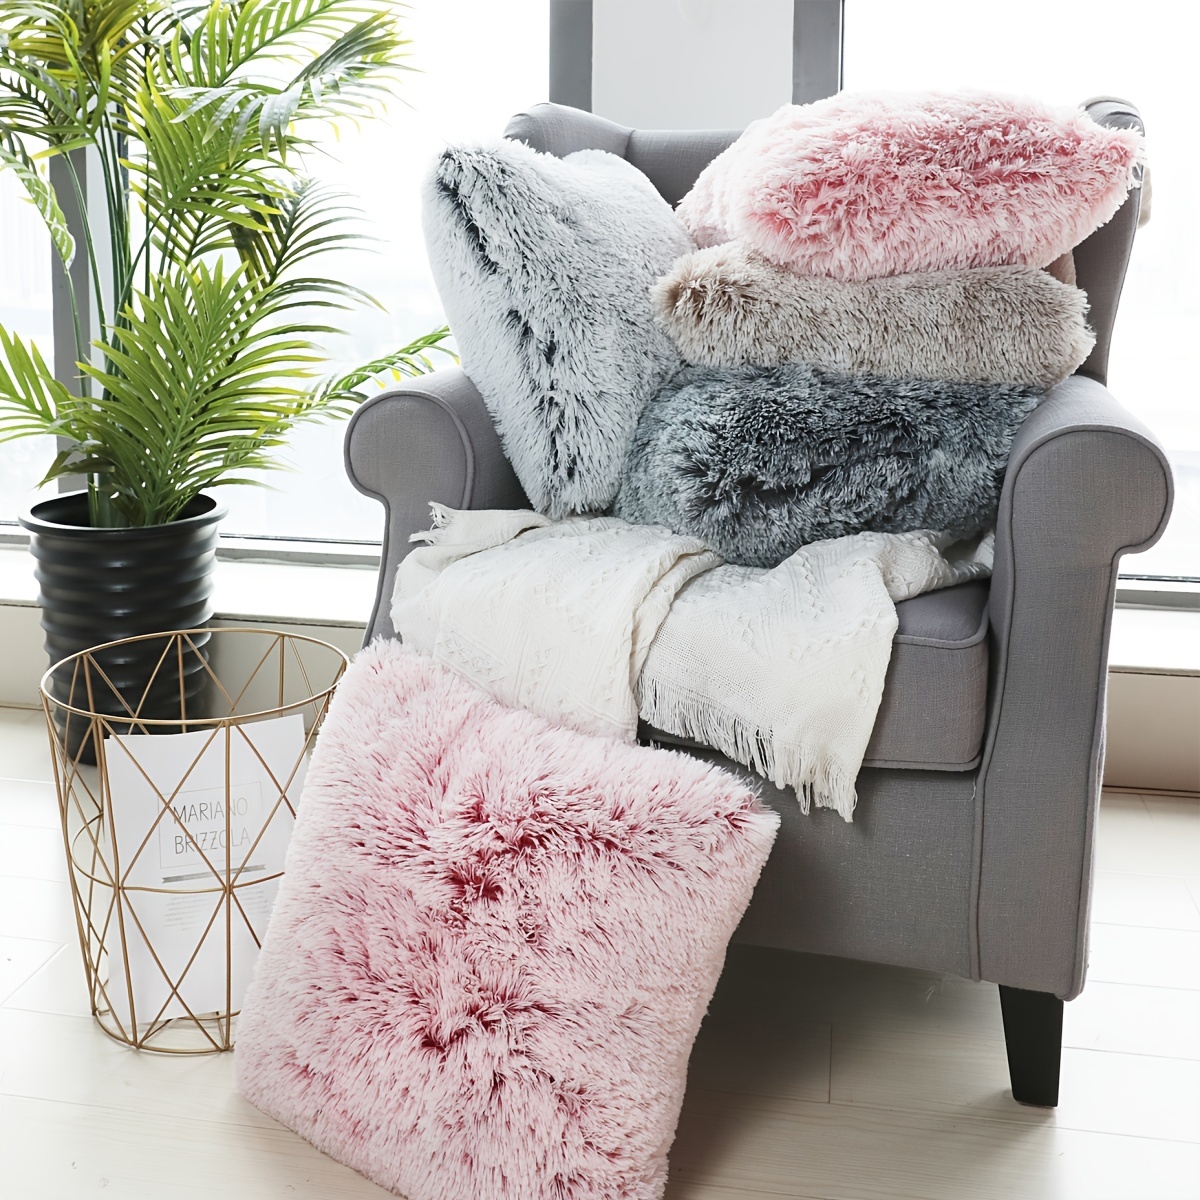 1 Pc/2 Pcs Home Decorative Luxury Series Super Soft Faux Fur Throw Pillow  Cover Cushion Case For Sofa Bed Chair, No Pillow Insert